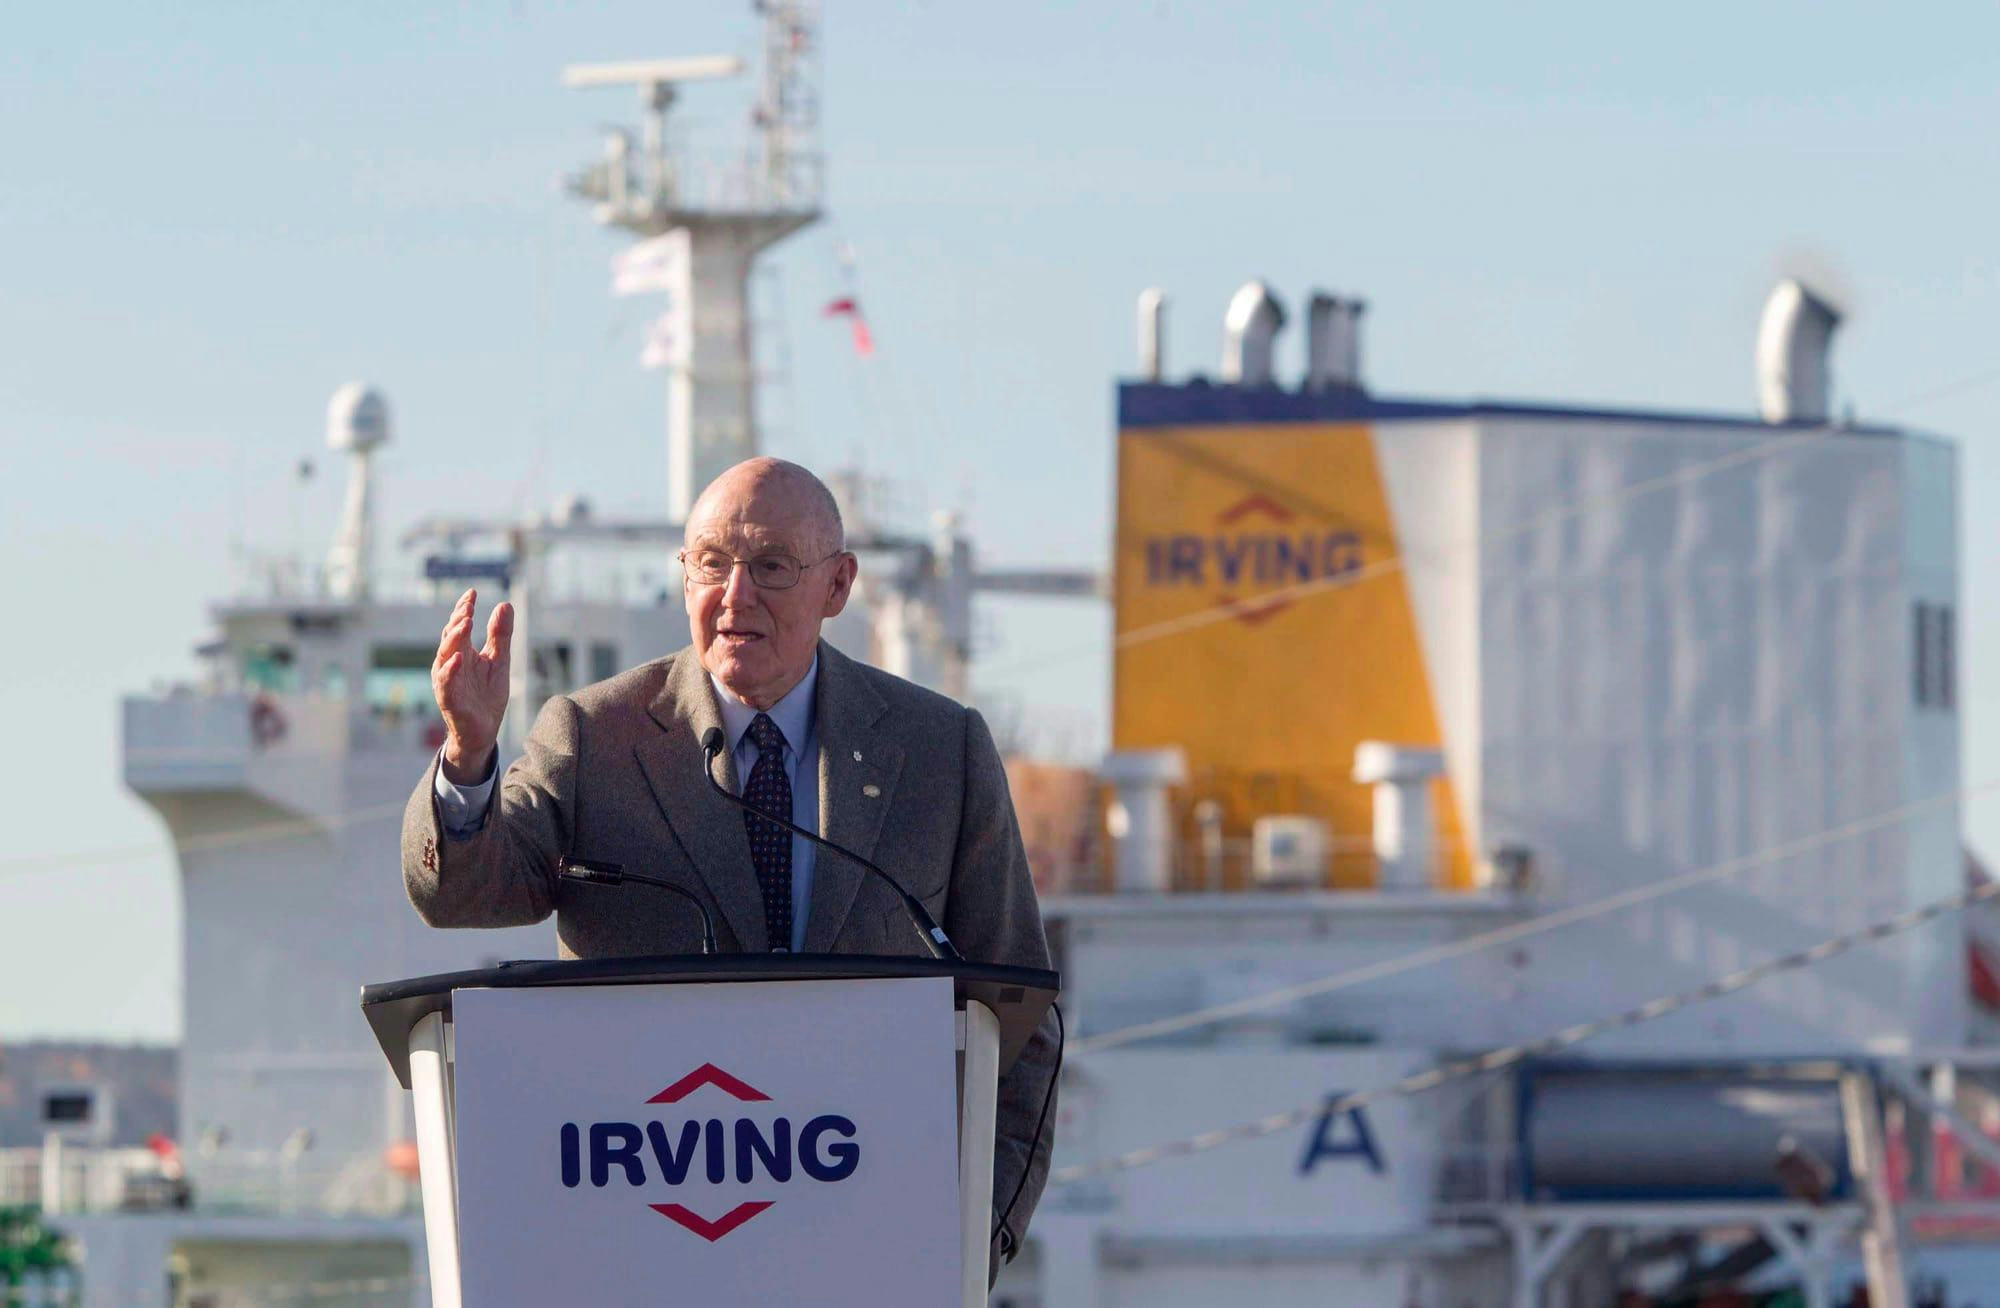 The former Irving stands behind a podium featuring the Irving Oil logo, with a large ship in the background.